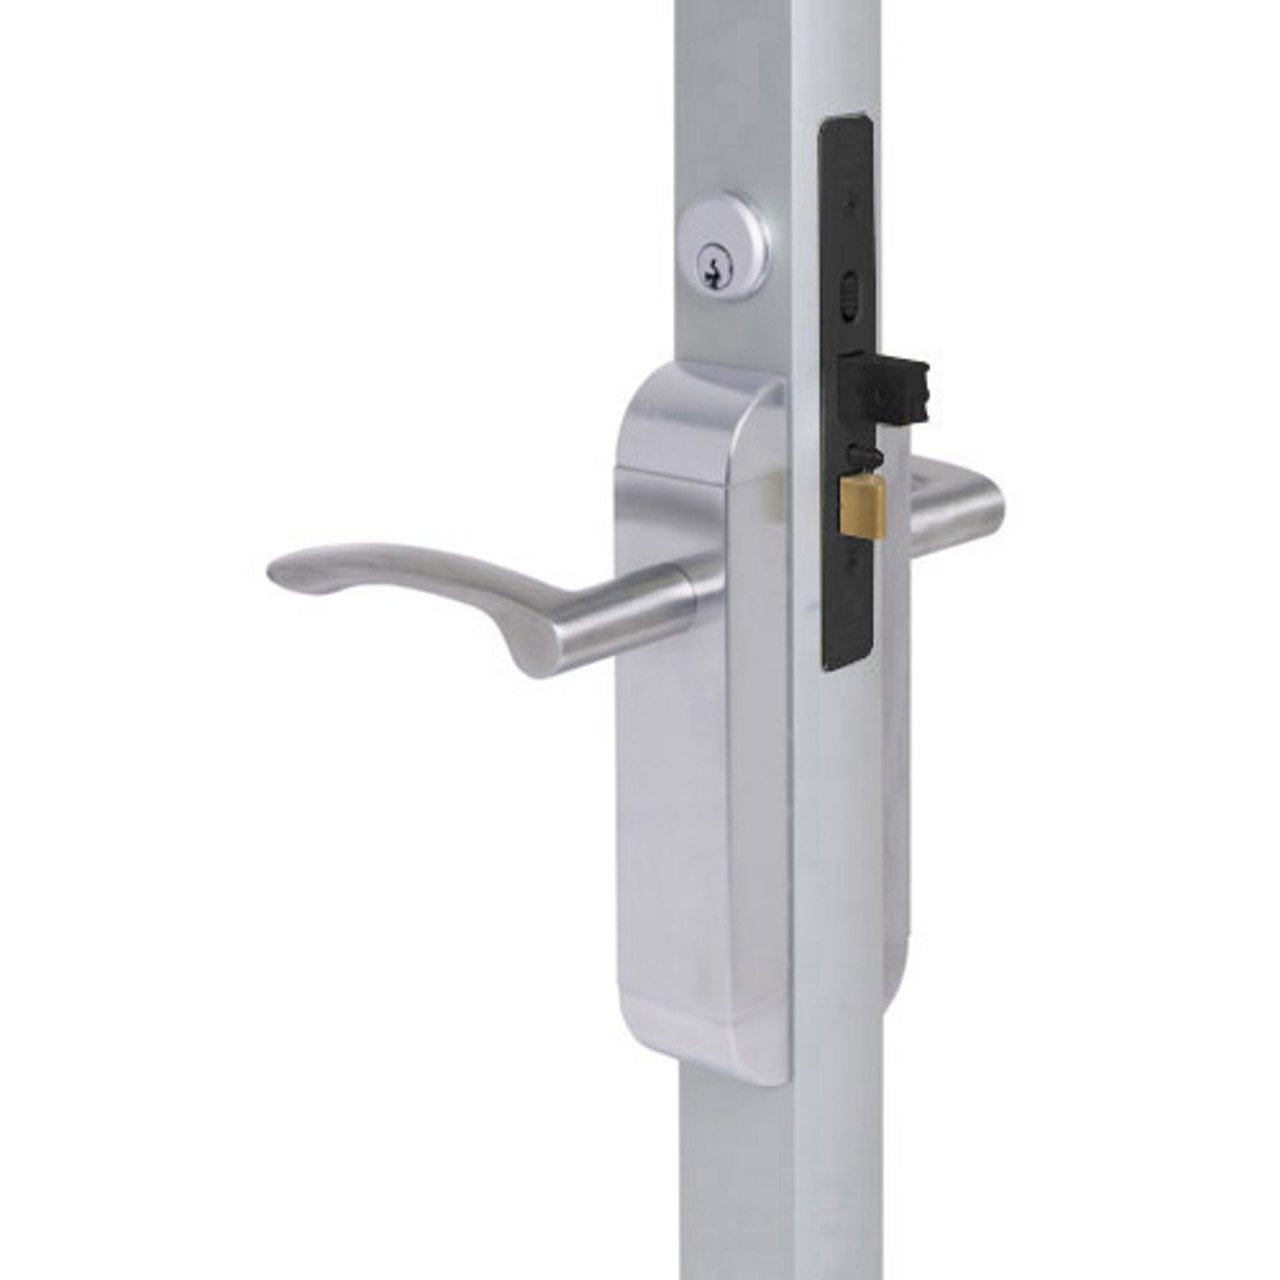 2190-313-101-32 Adams Rite Dual Force Interconnected 2190 series Deadlock/Deadlatch in Bright Stainless